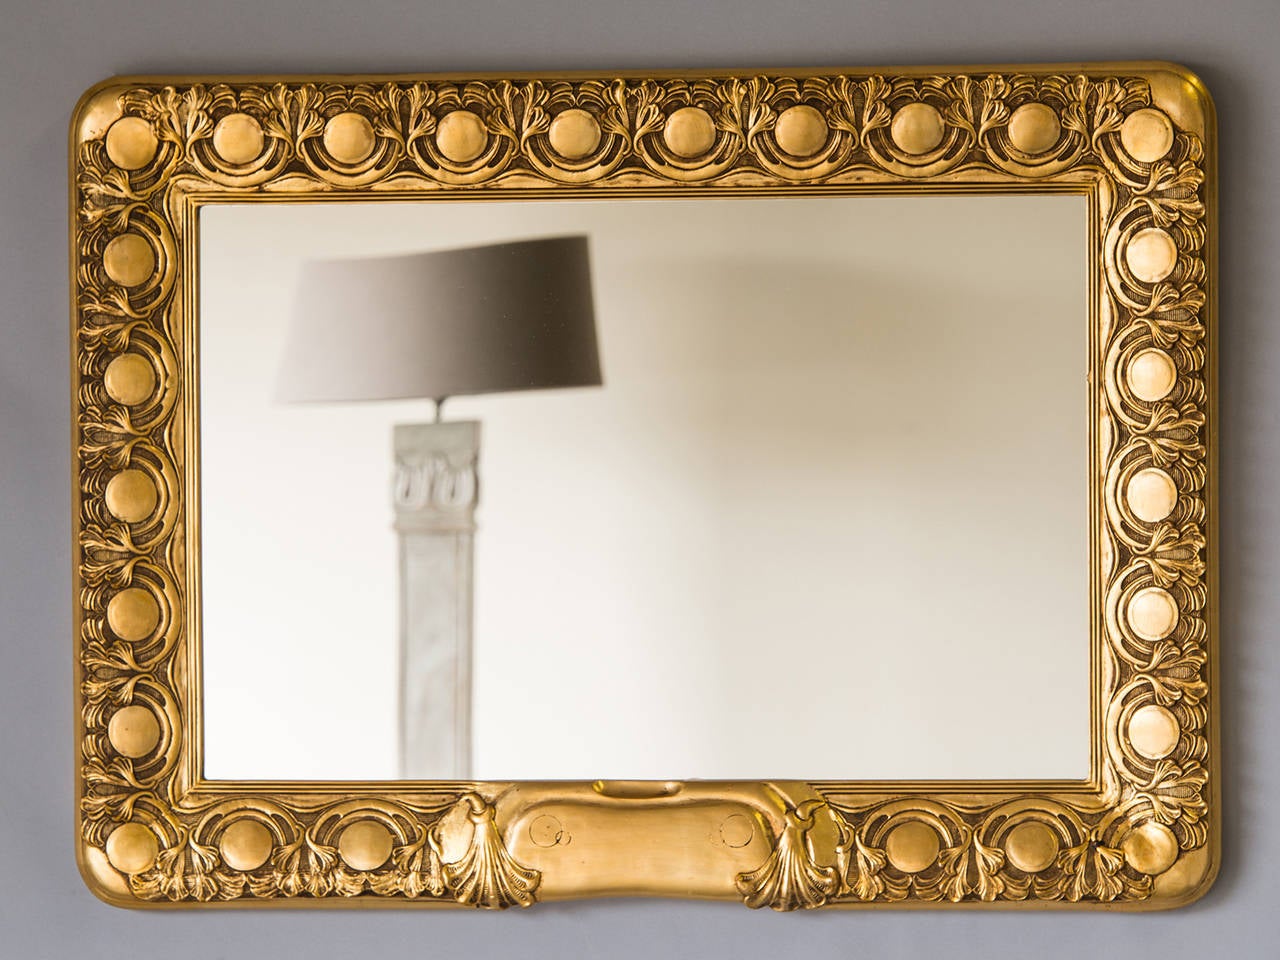 Receive our new selections direct from 1stdibs by email each week. Please click Follow Dealer below and see them first!

Antique Austrian Art Nouveau period giltwood frame circa 1890, enclosing a mirror.